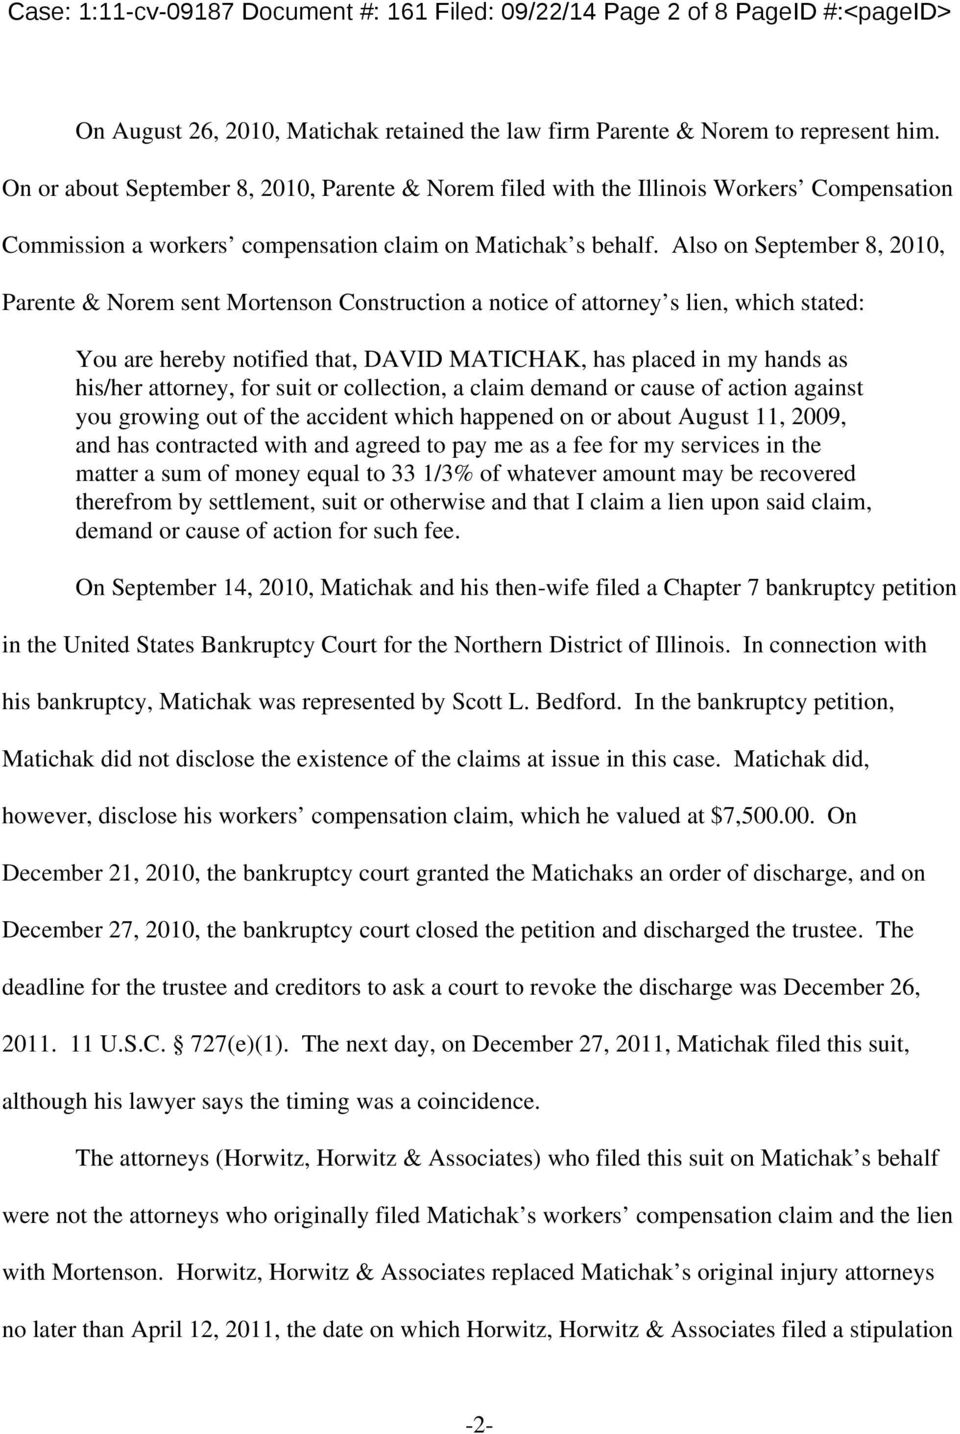 Also on September 8, 2010, Parente & Norem sent Mortenson Construction a notice of attorney s lien, which stated: You are hereby notified that, DAVID MATICHAK, has placed in my hands as his/her